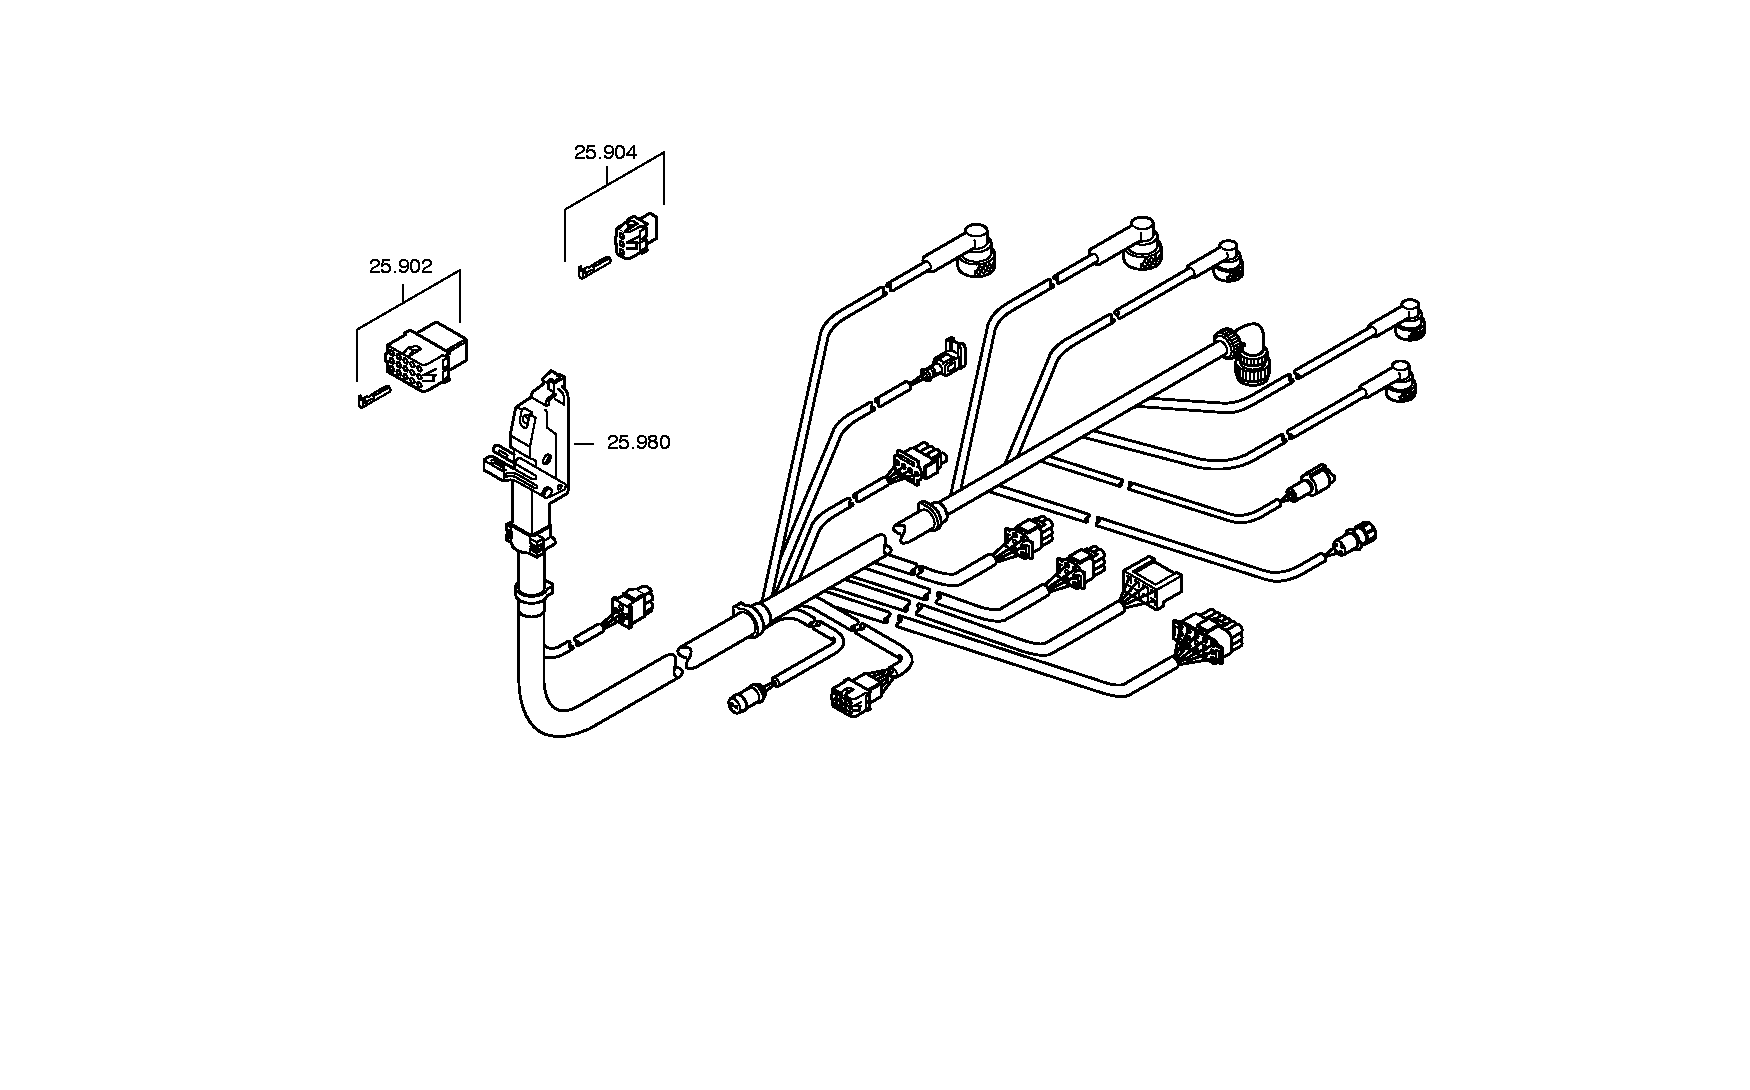 drawing for PPM 5904662469 - PLUG KIT (figure 1)